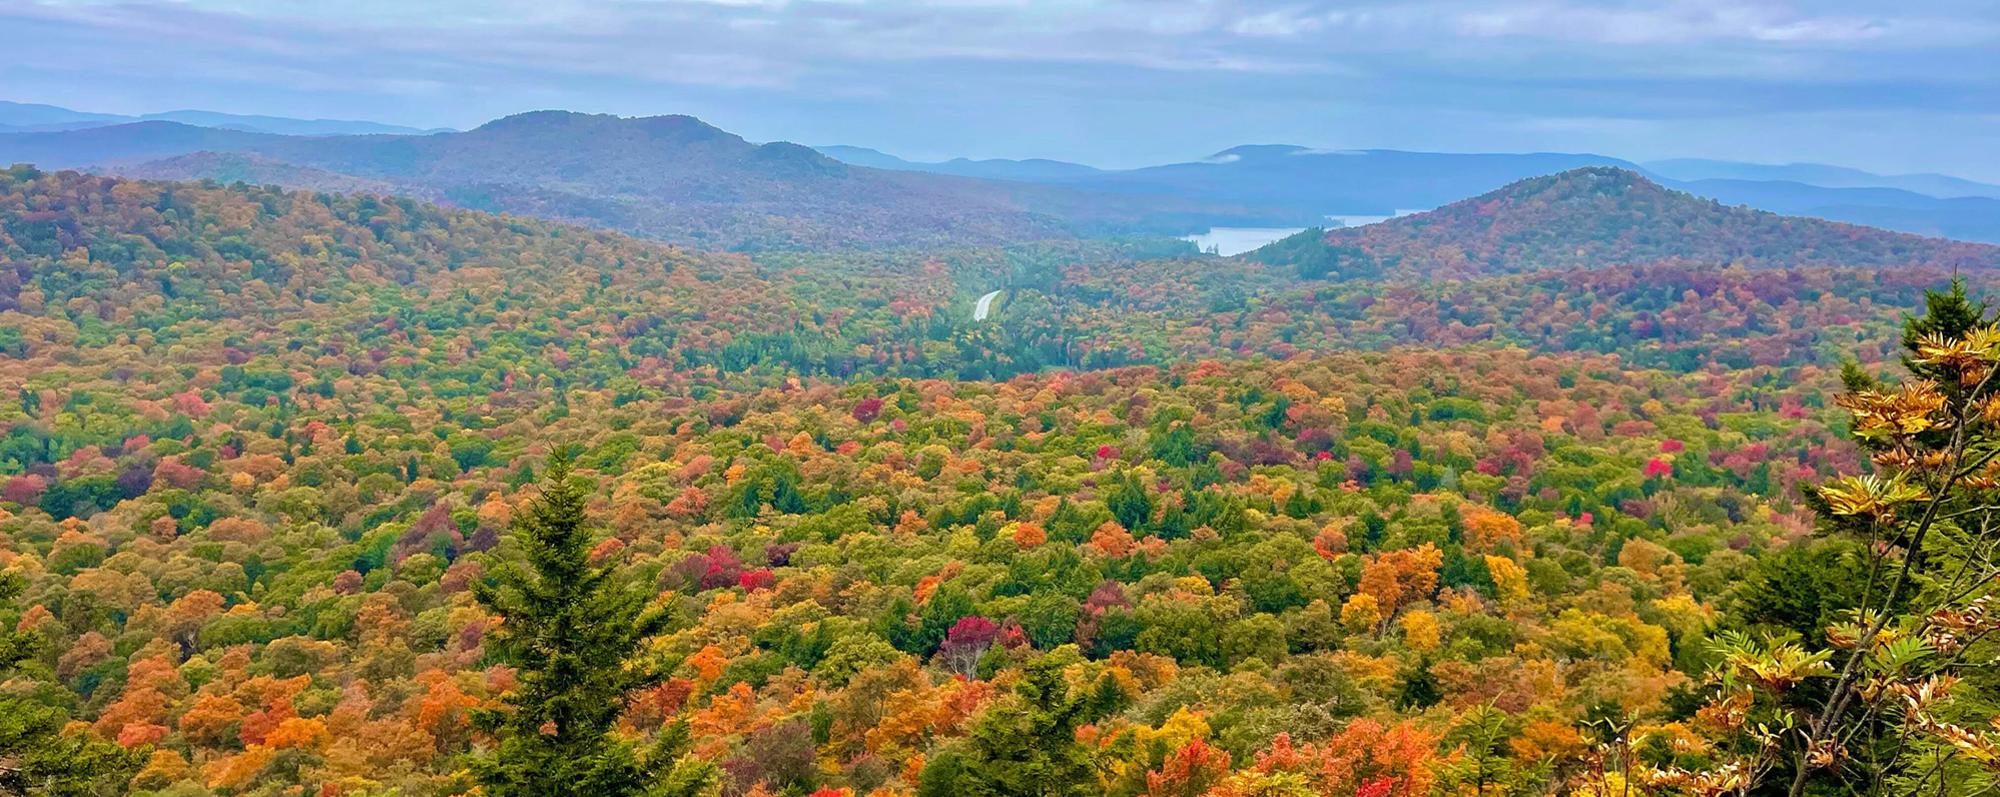 View of colorful fall foliage in the Adirondacks from Coney Mountain in Tupper Lake